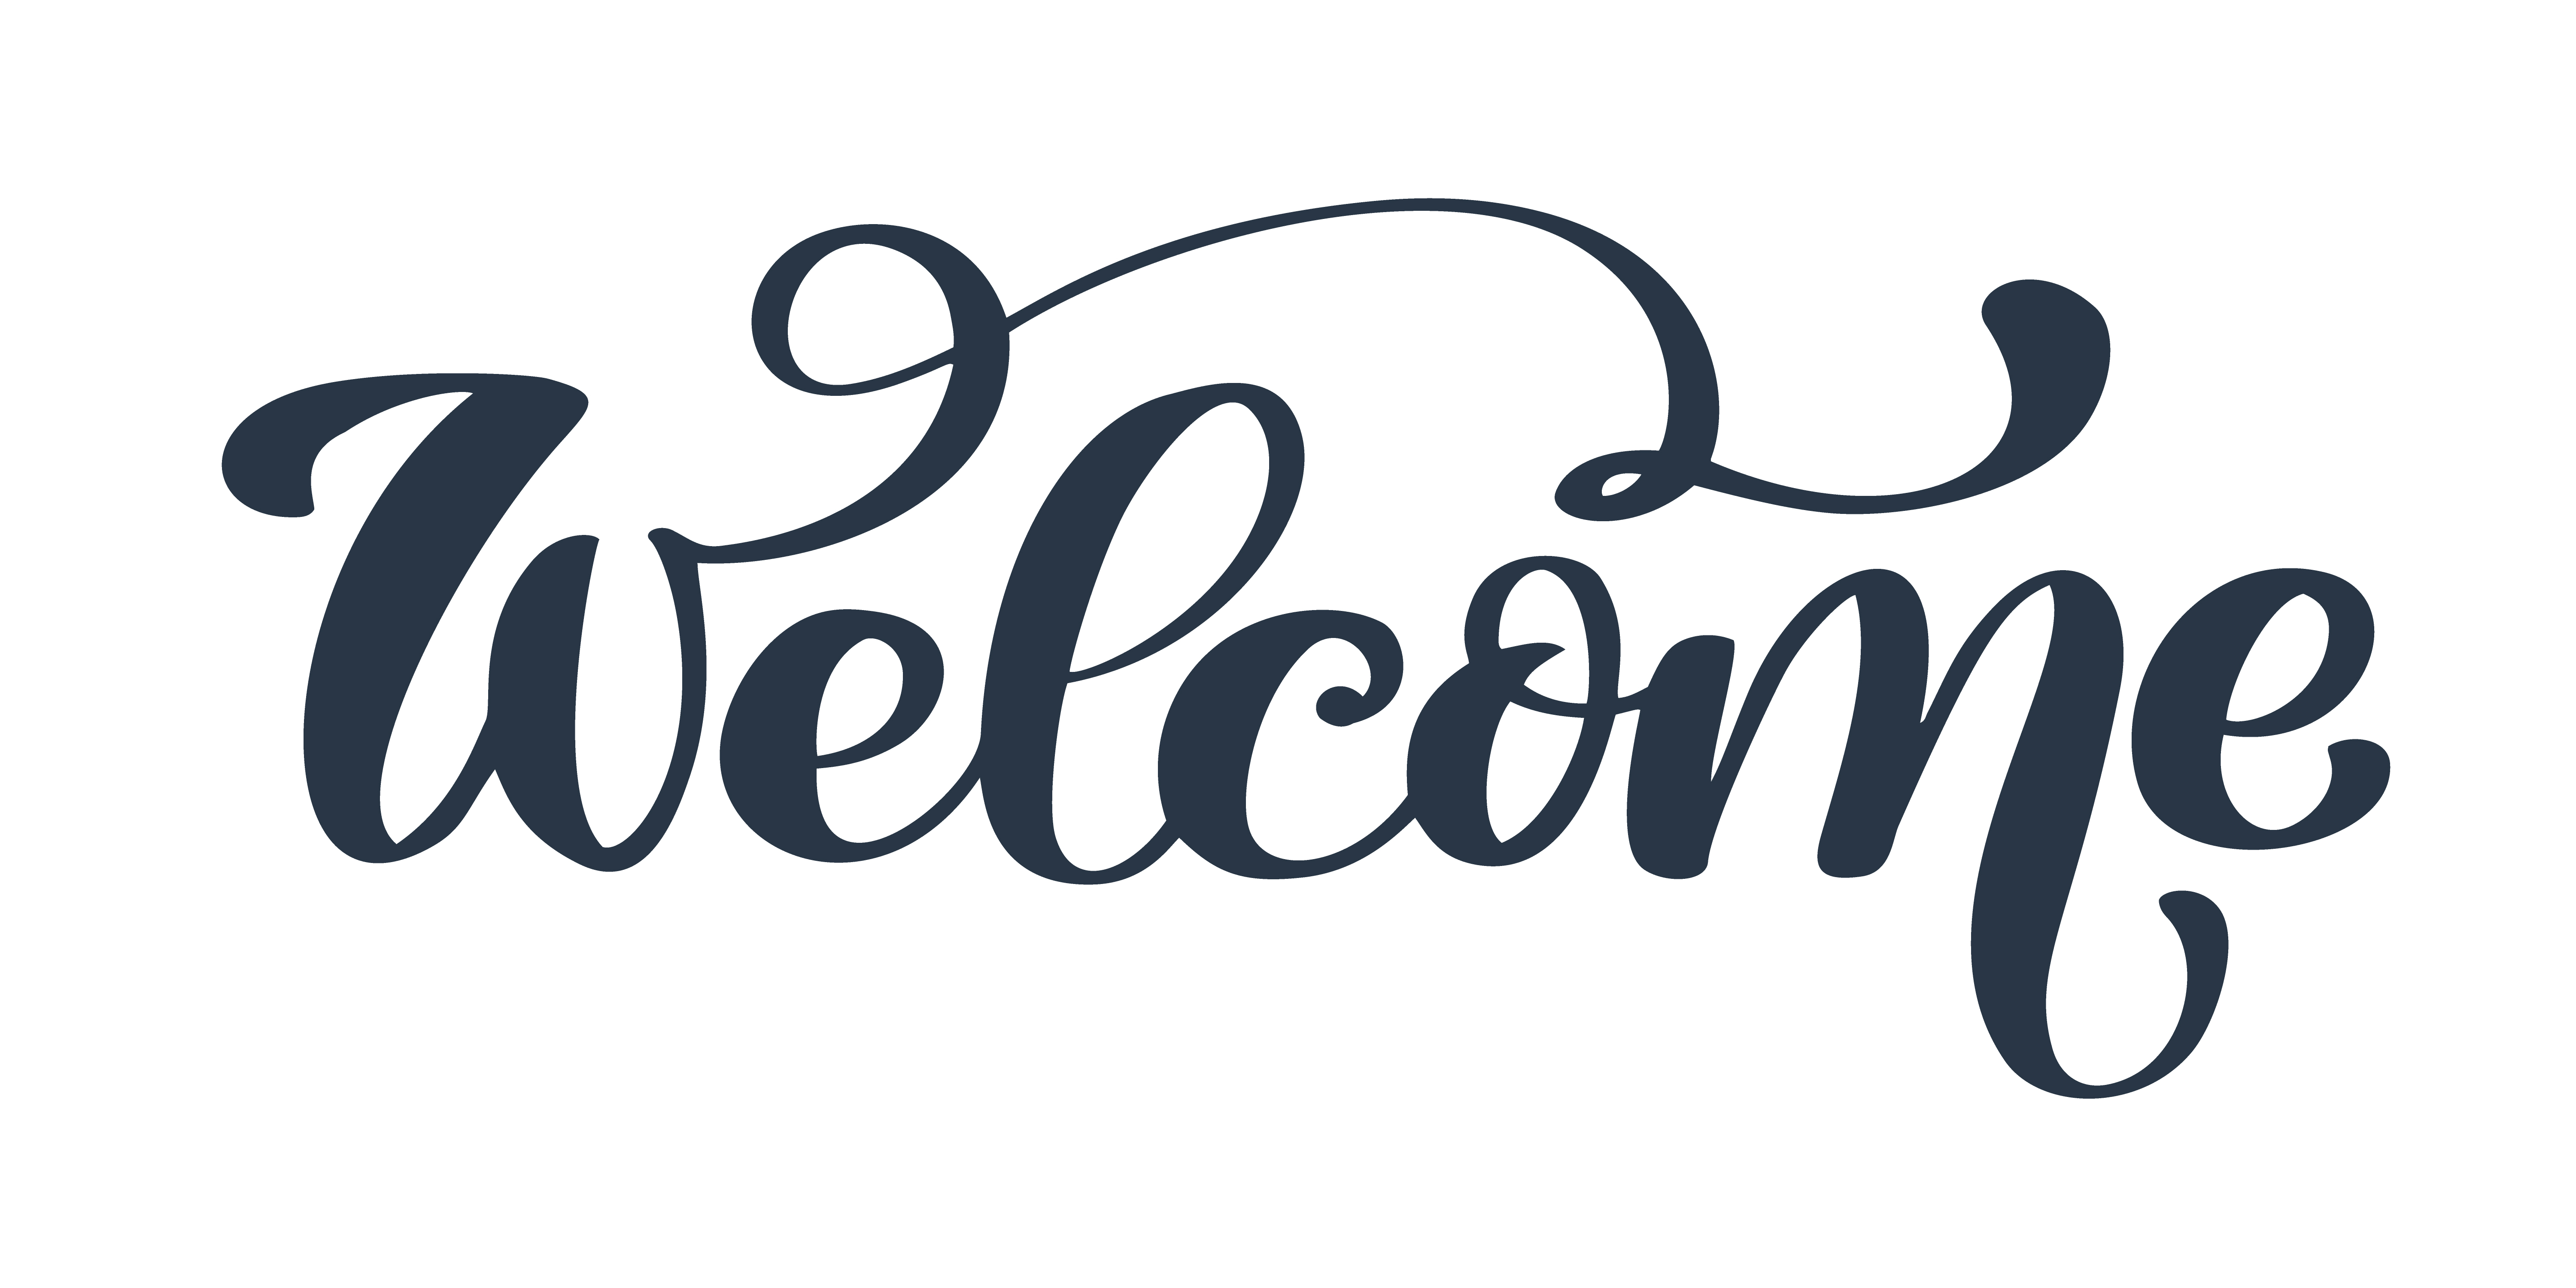 welcome-hand-drawn-text-371208-vector-art-at-vecteezy